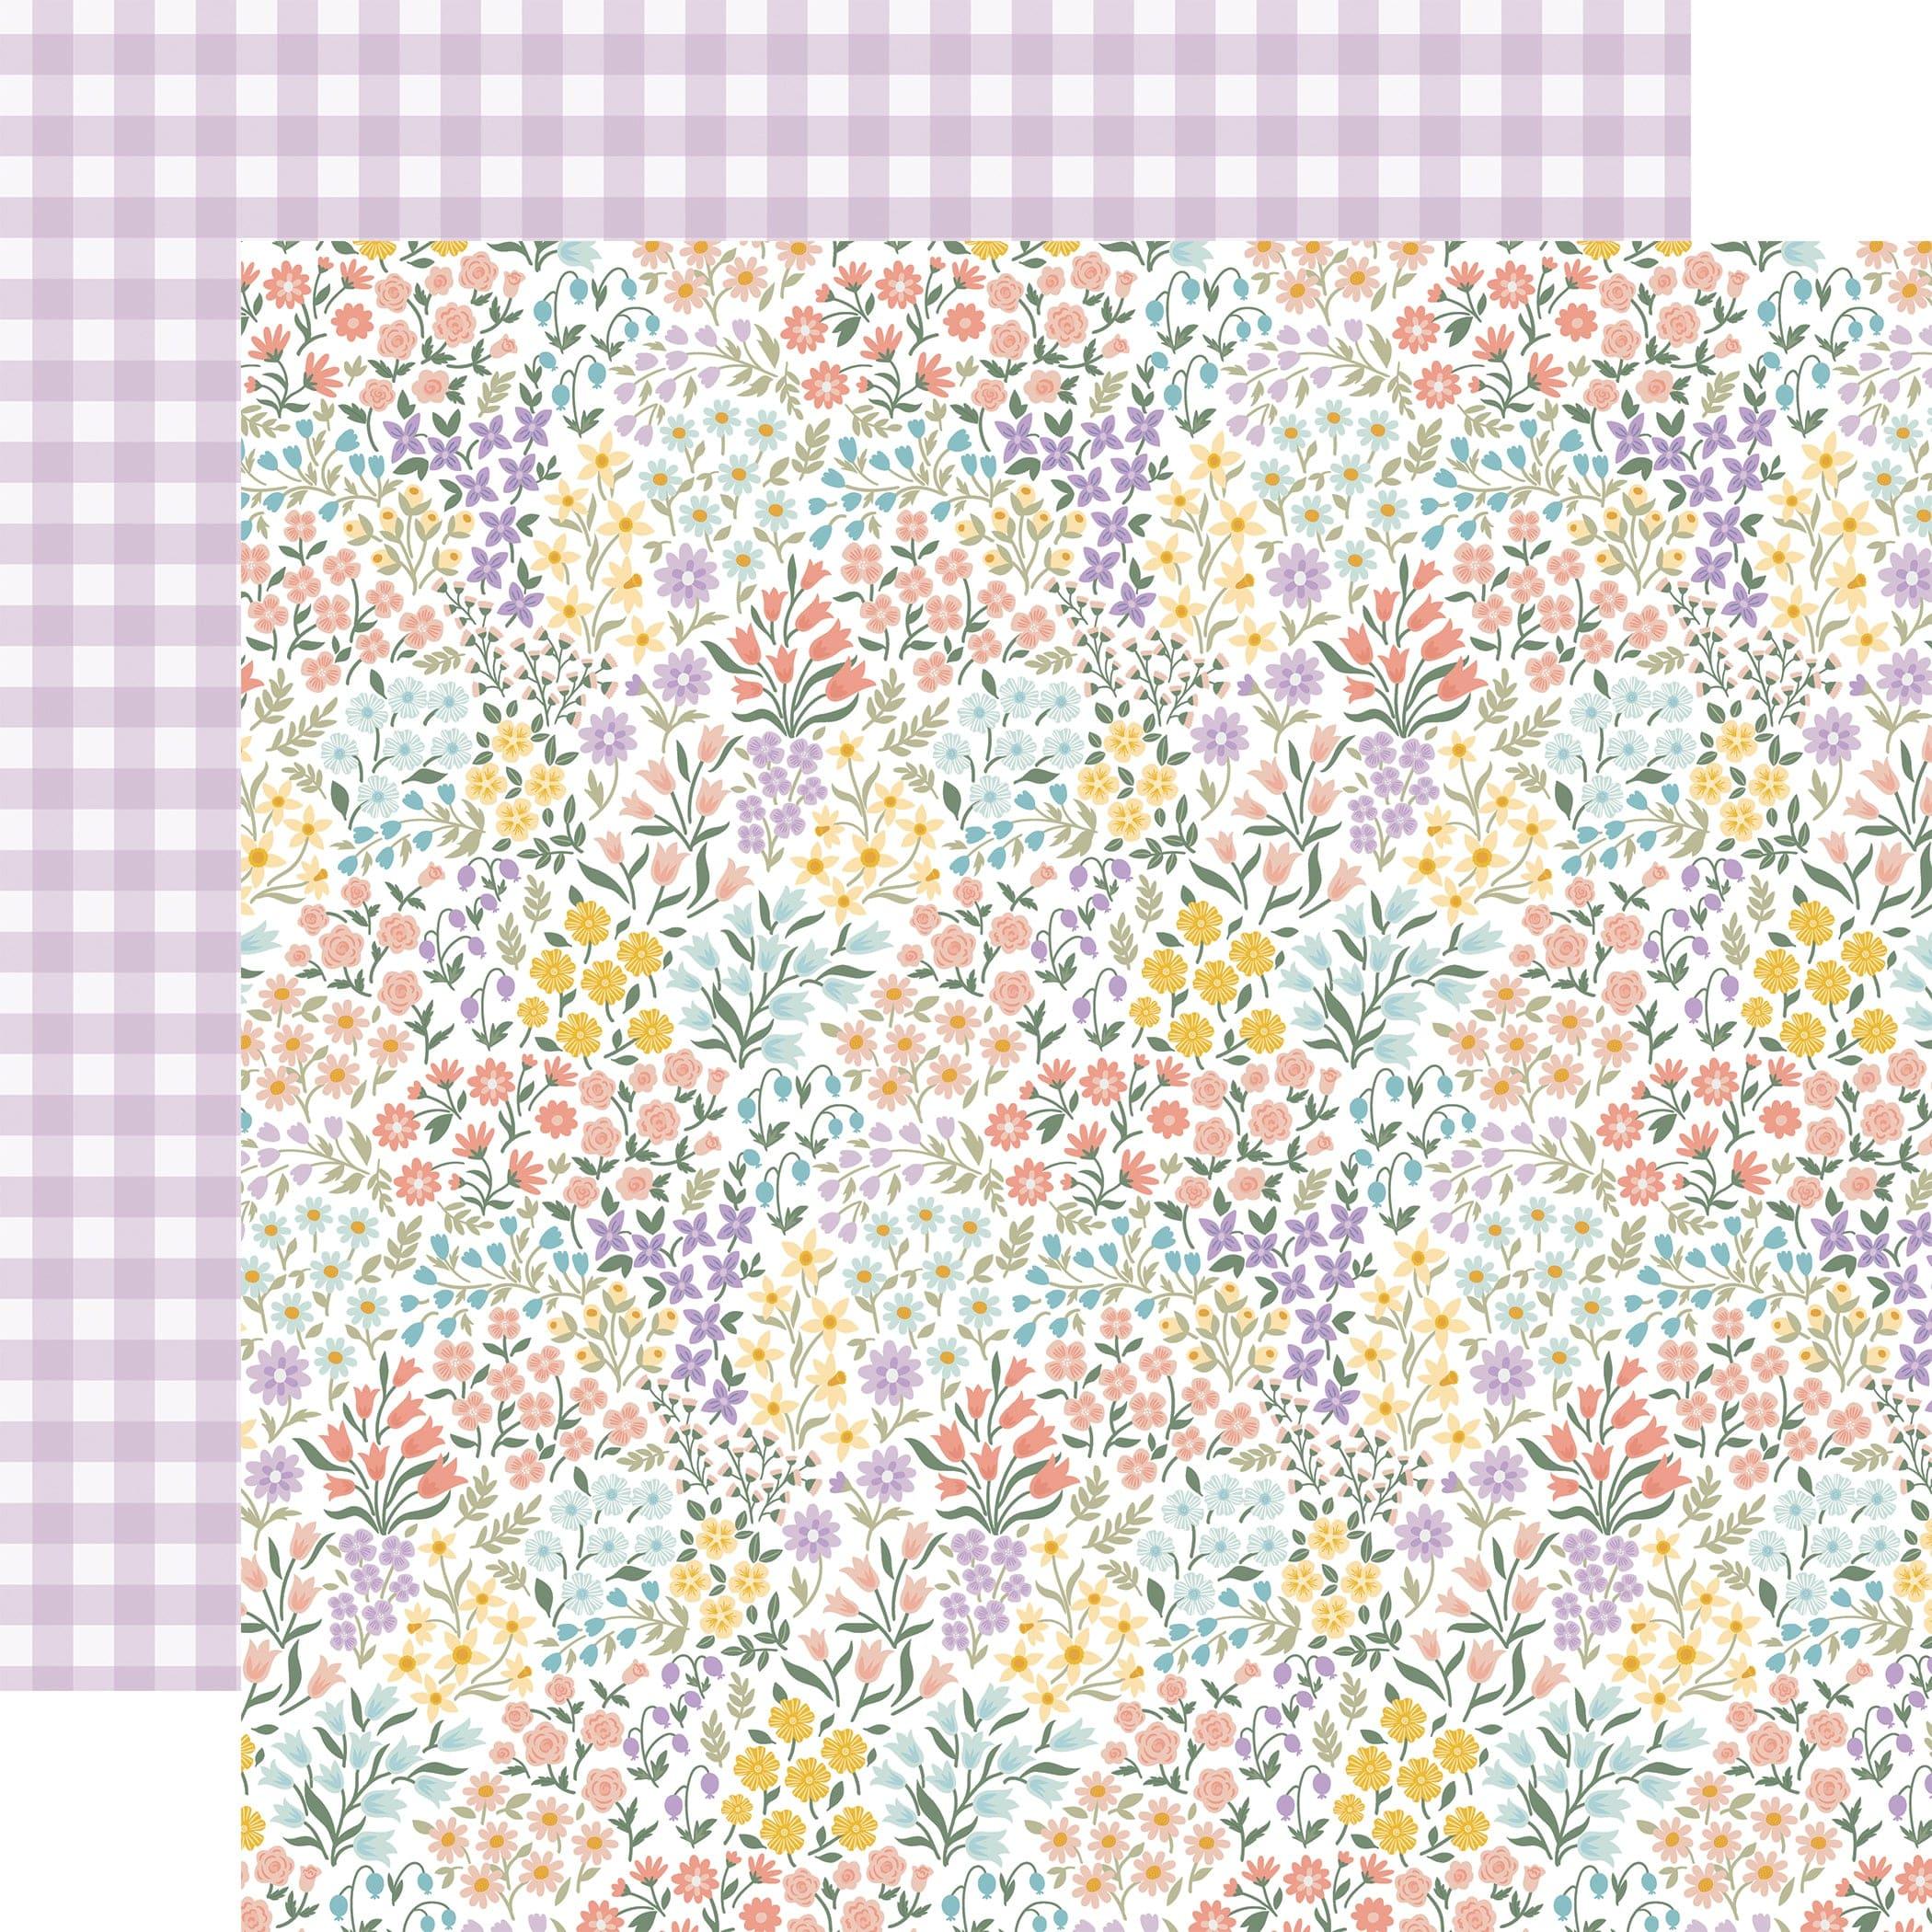 It's Easter Time Collection Easter Blooms 12 x 12 Double-Sided Scrapbook Paper by Echo Park Paper - Scrapbook Supply Companies